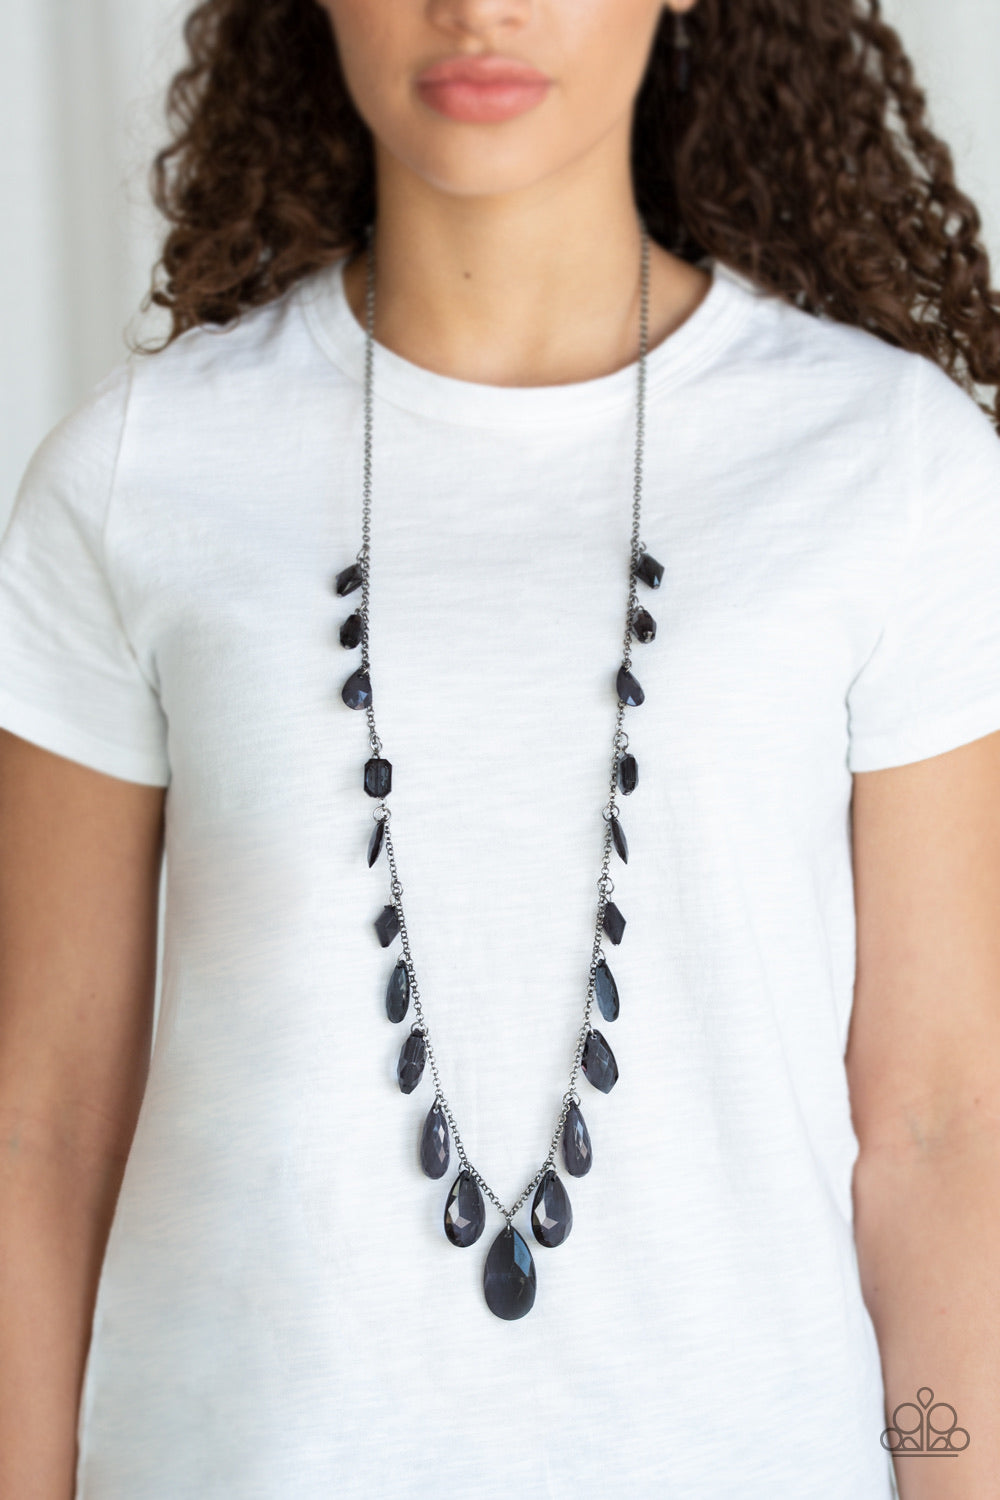 Paparazzi Jewelry Necklace GLOW And Steady Wins The Race - Black